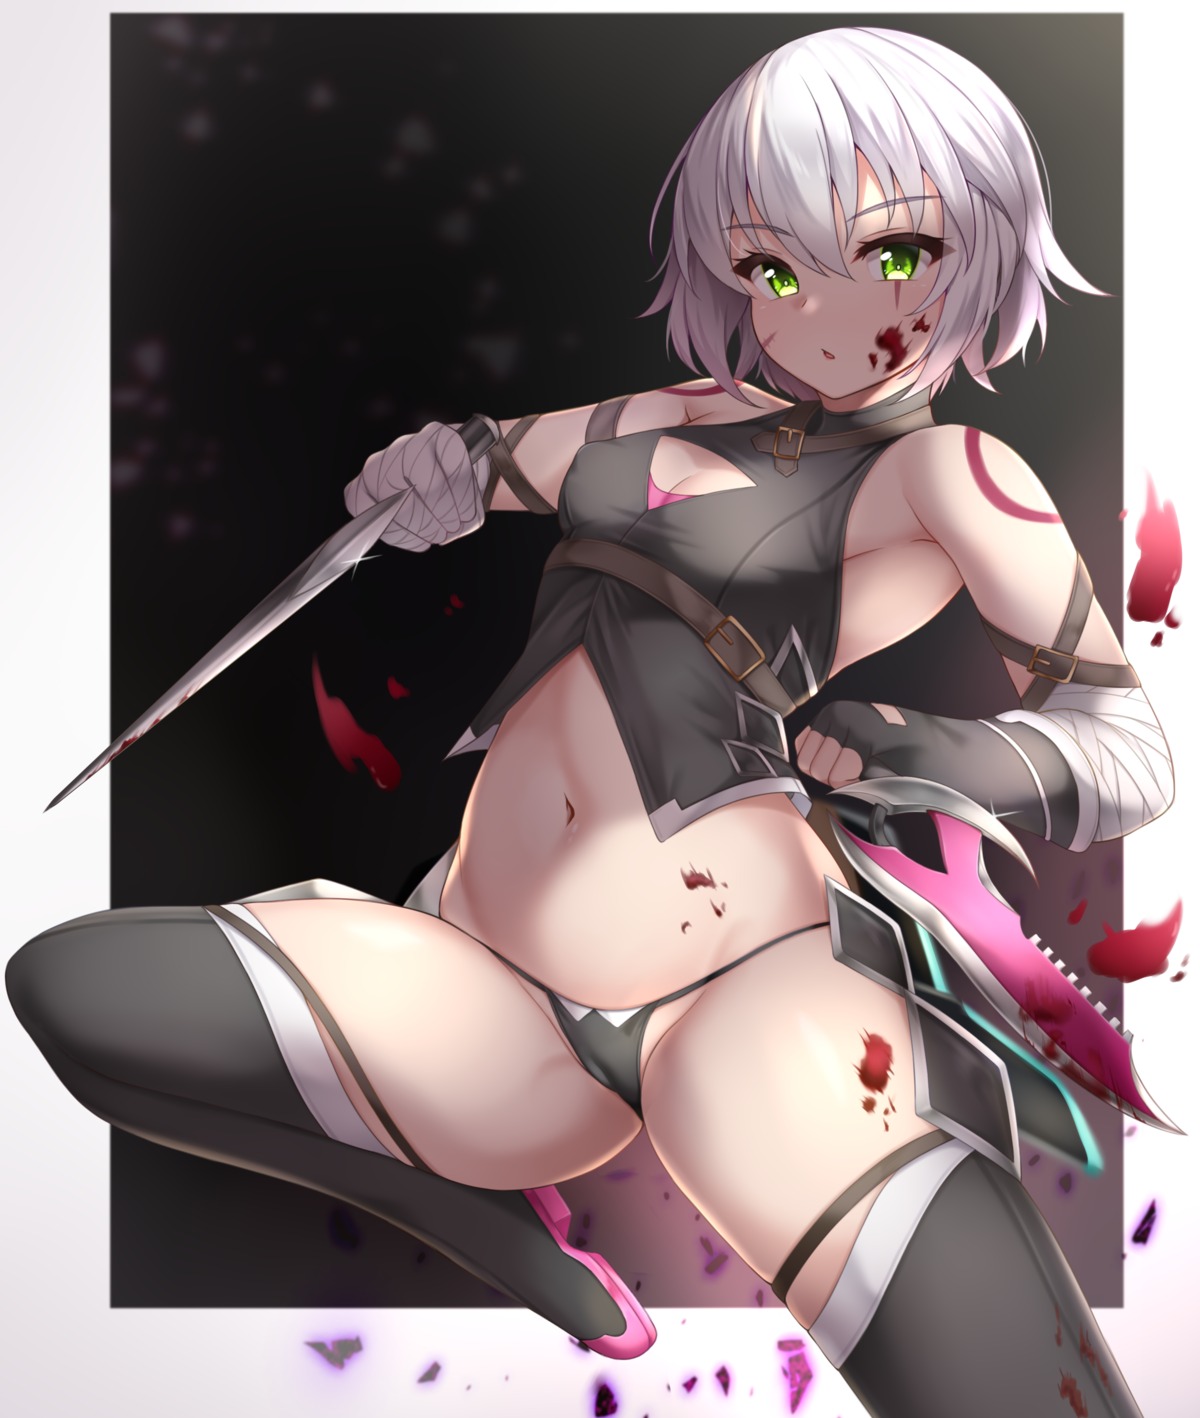 bandages blood cameltoe cleavage erect_nipples fate/apocrypha fate/stay_night garter jack_the_ripper lomocya pantsu tattoo thighhighs weapon